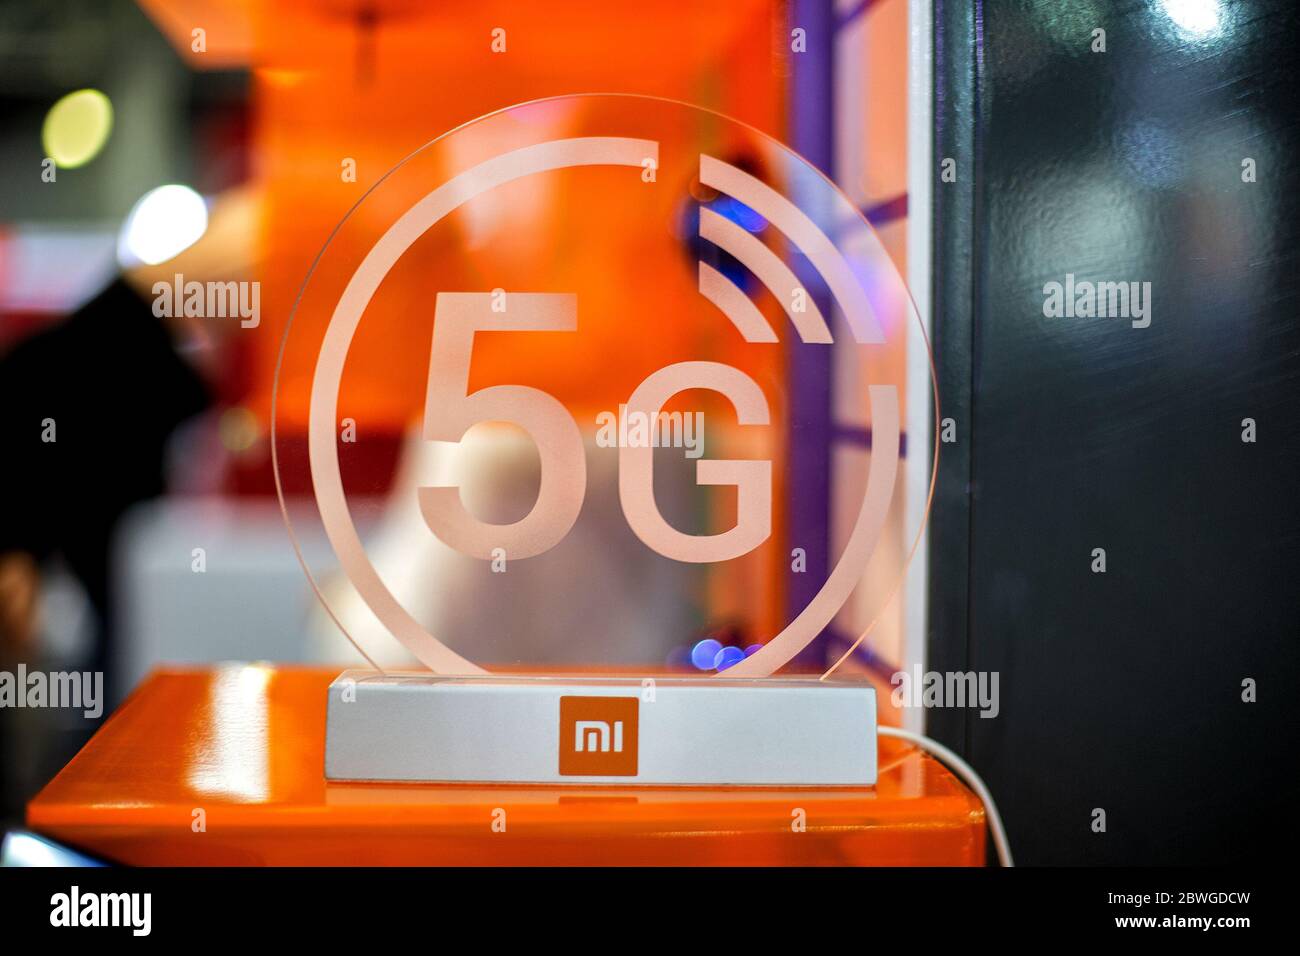 Moscow, Russia - October 04, 2019: 5g white icon xiaomi on transparent plastics. Orange background in blur. close up, front view. Stock Photo